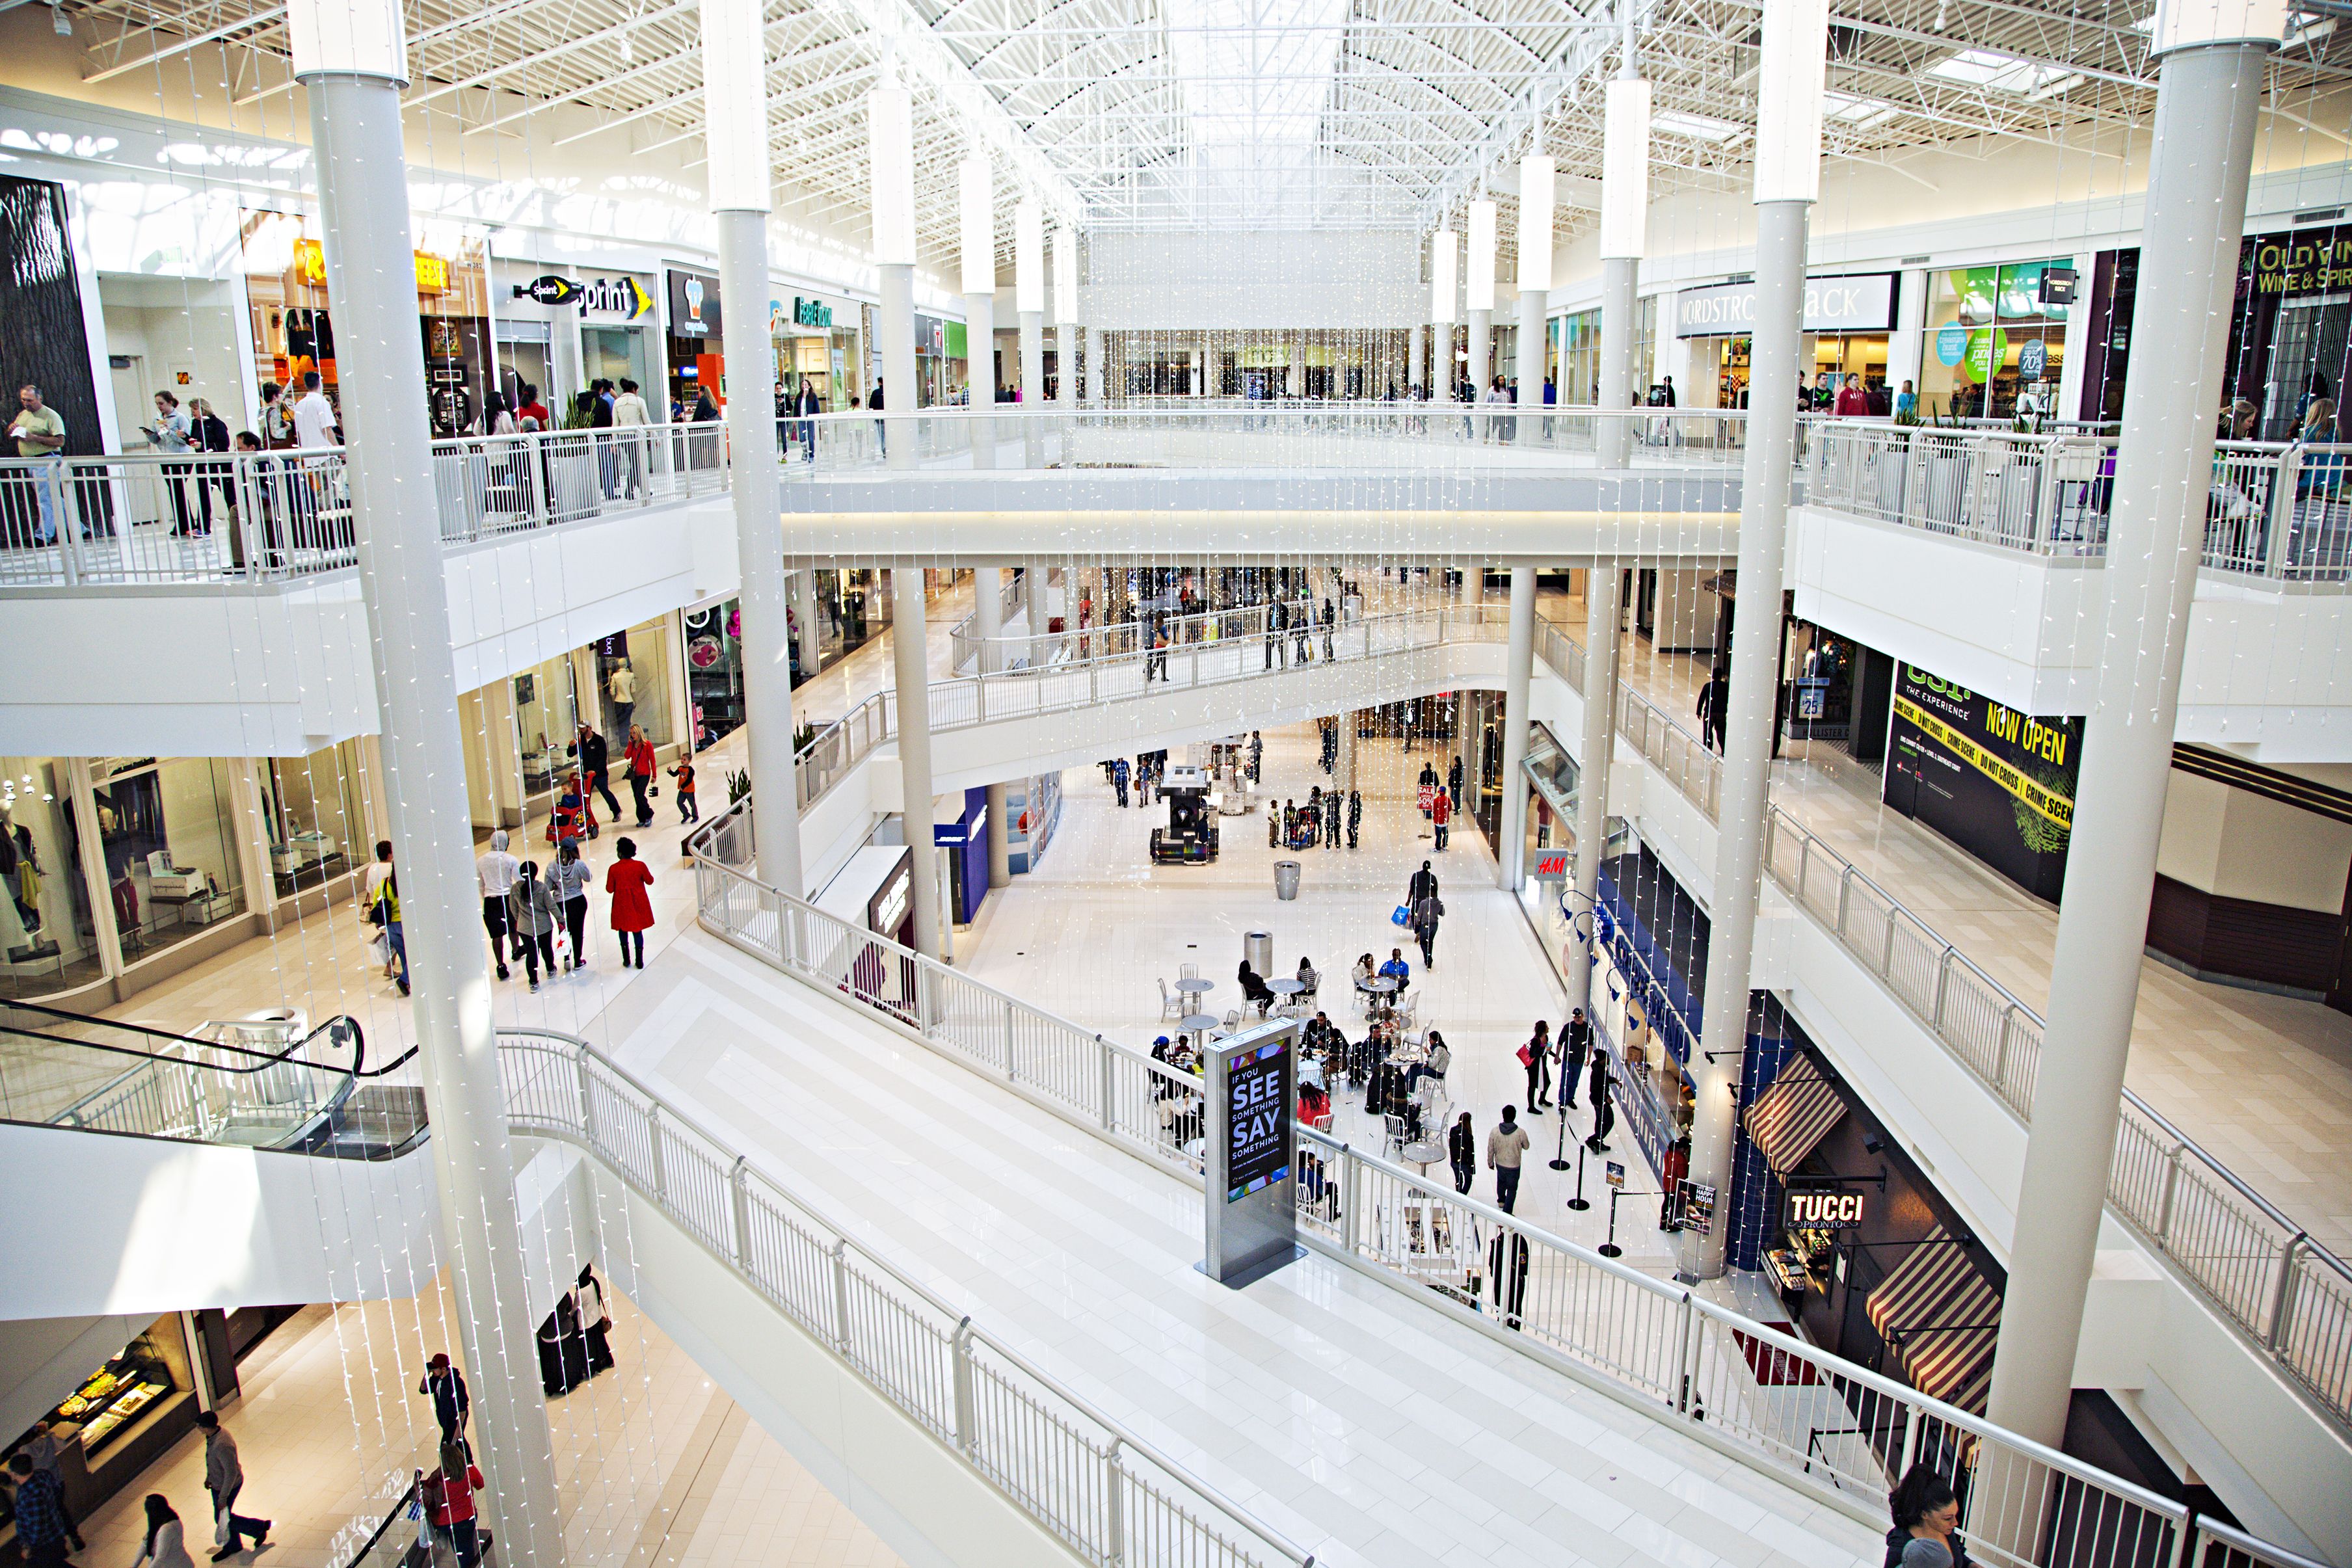 America's best malls have this tenant in common